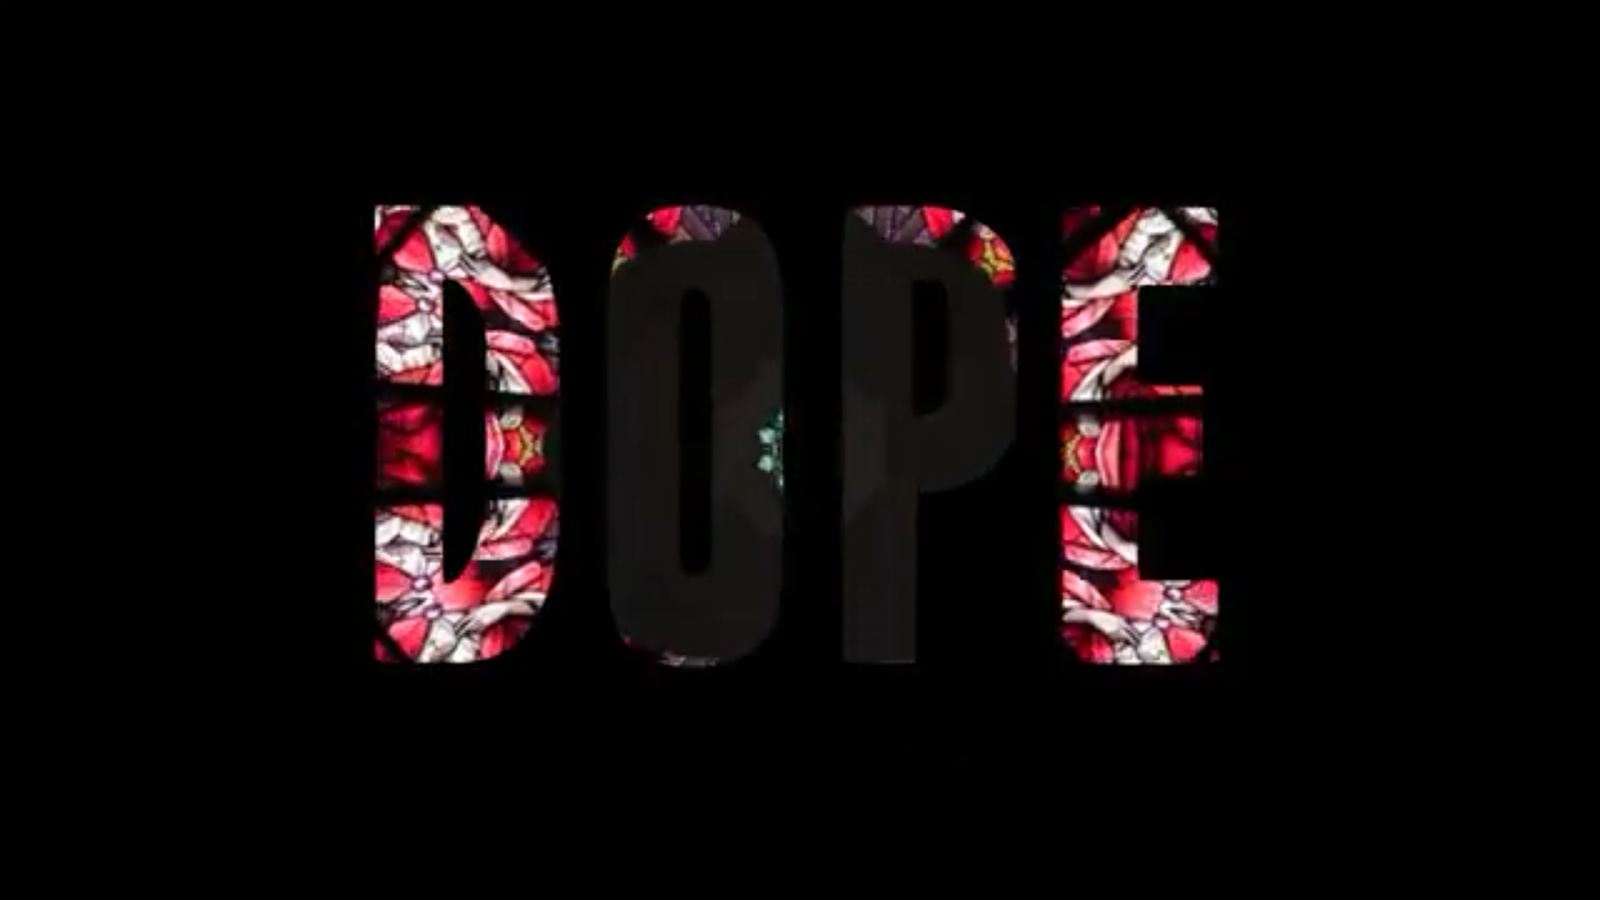 Dope Wallpaper Hd The video for dope was